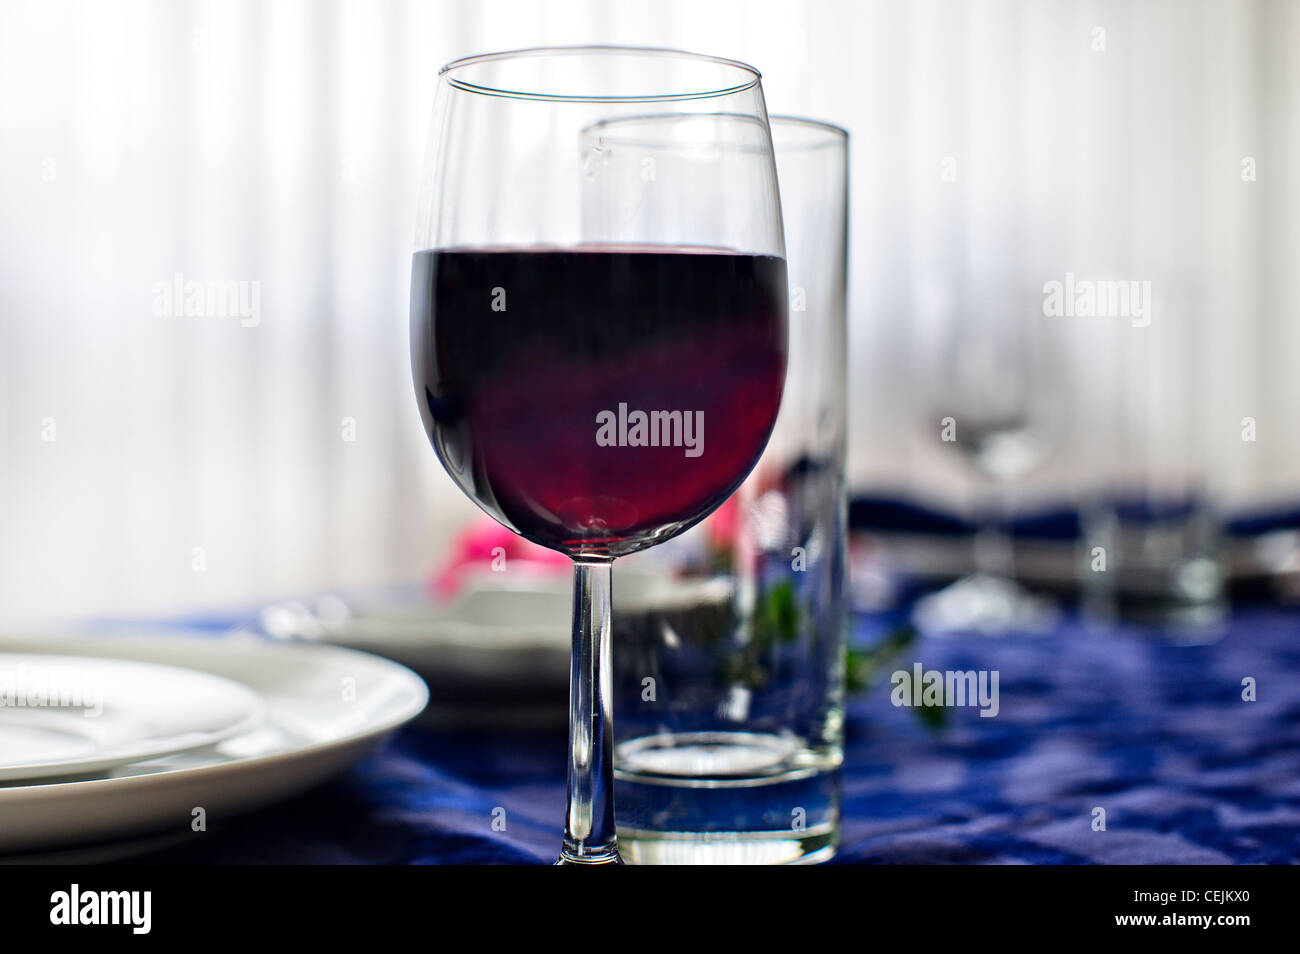 Glass Of Cheap Red Wine With A Drinking Straw On A Reflective Silver Table  With White Background. Stock Photo, Picture and Royalty Free Image. Image  5436658.